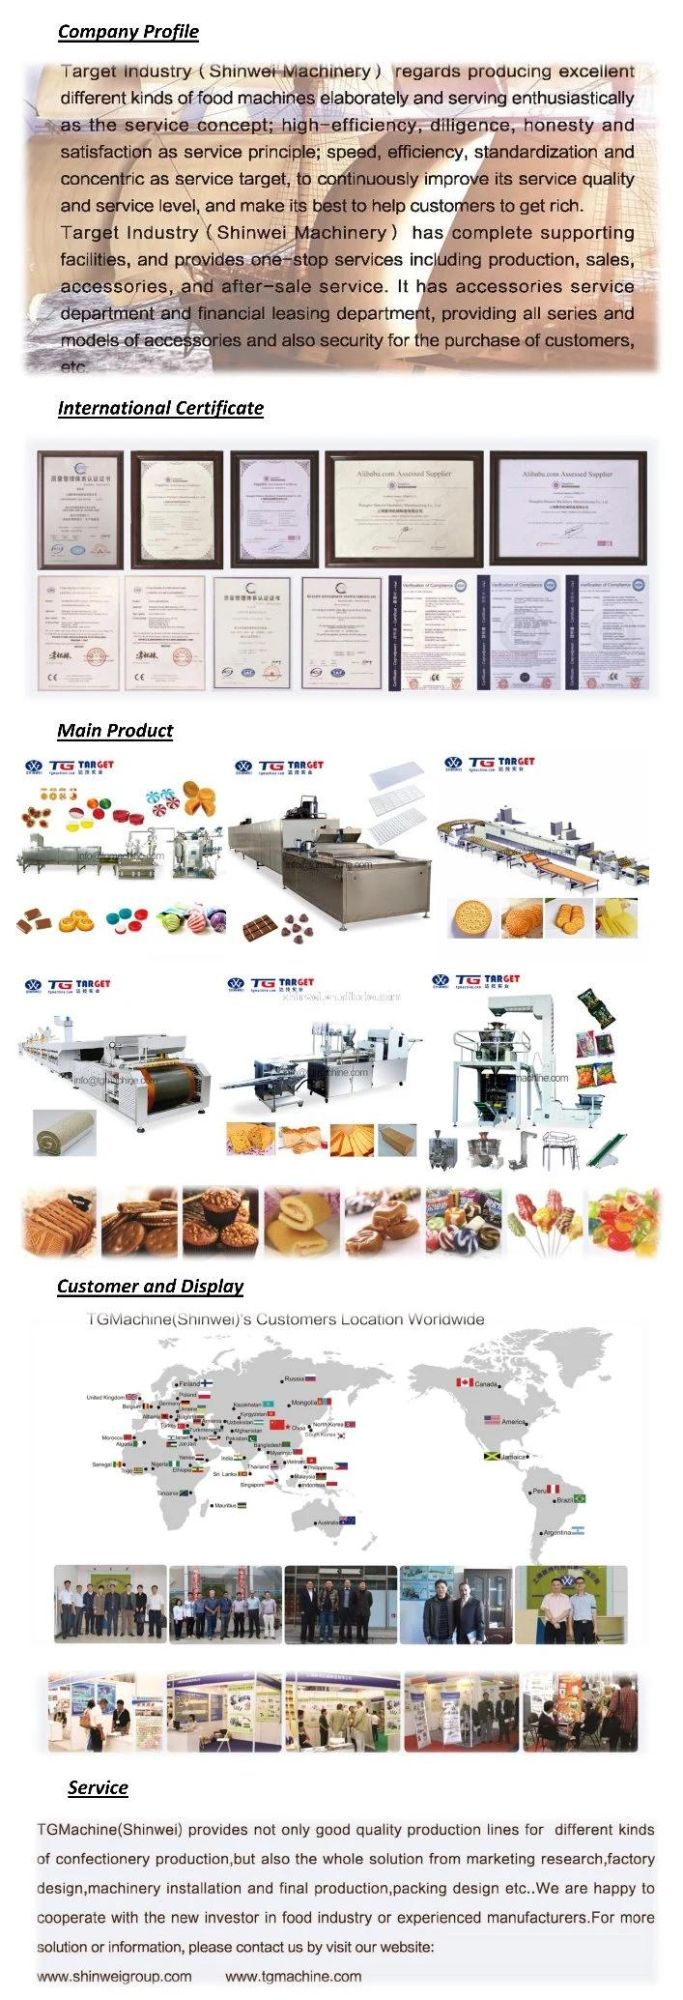 Bcq 480 Automatic Biscuit Producing Line for Hard and Soft Biscuit